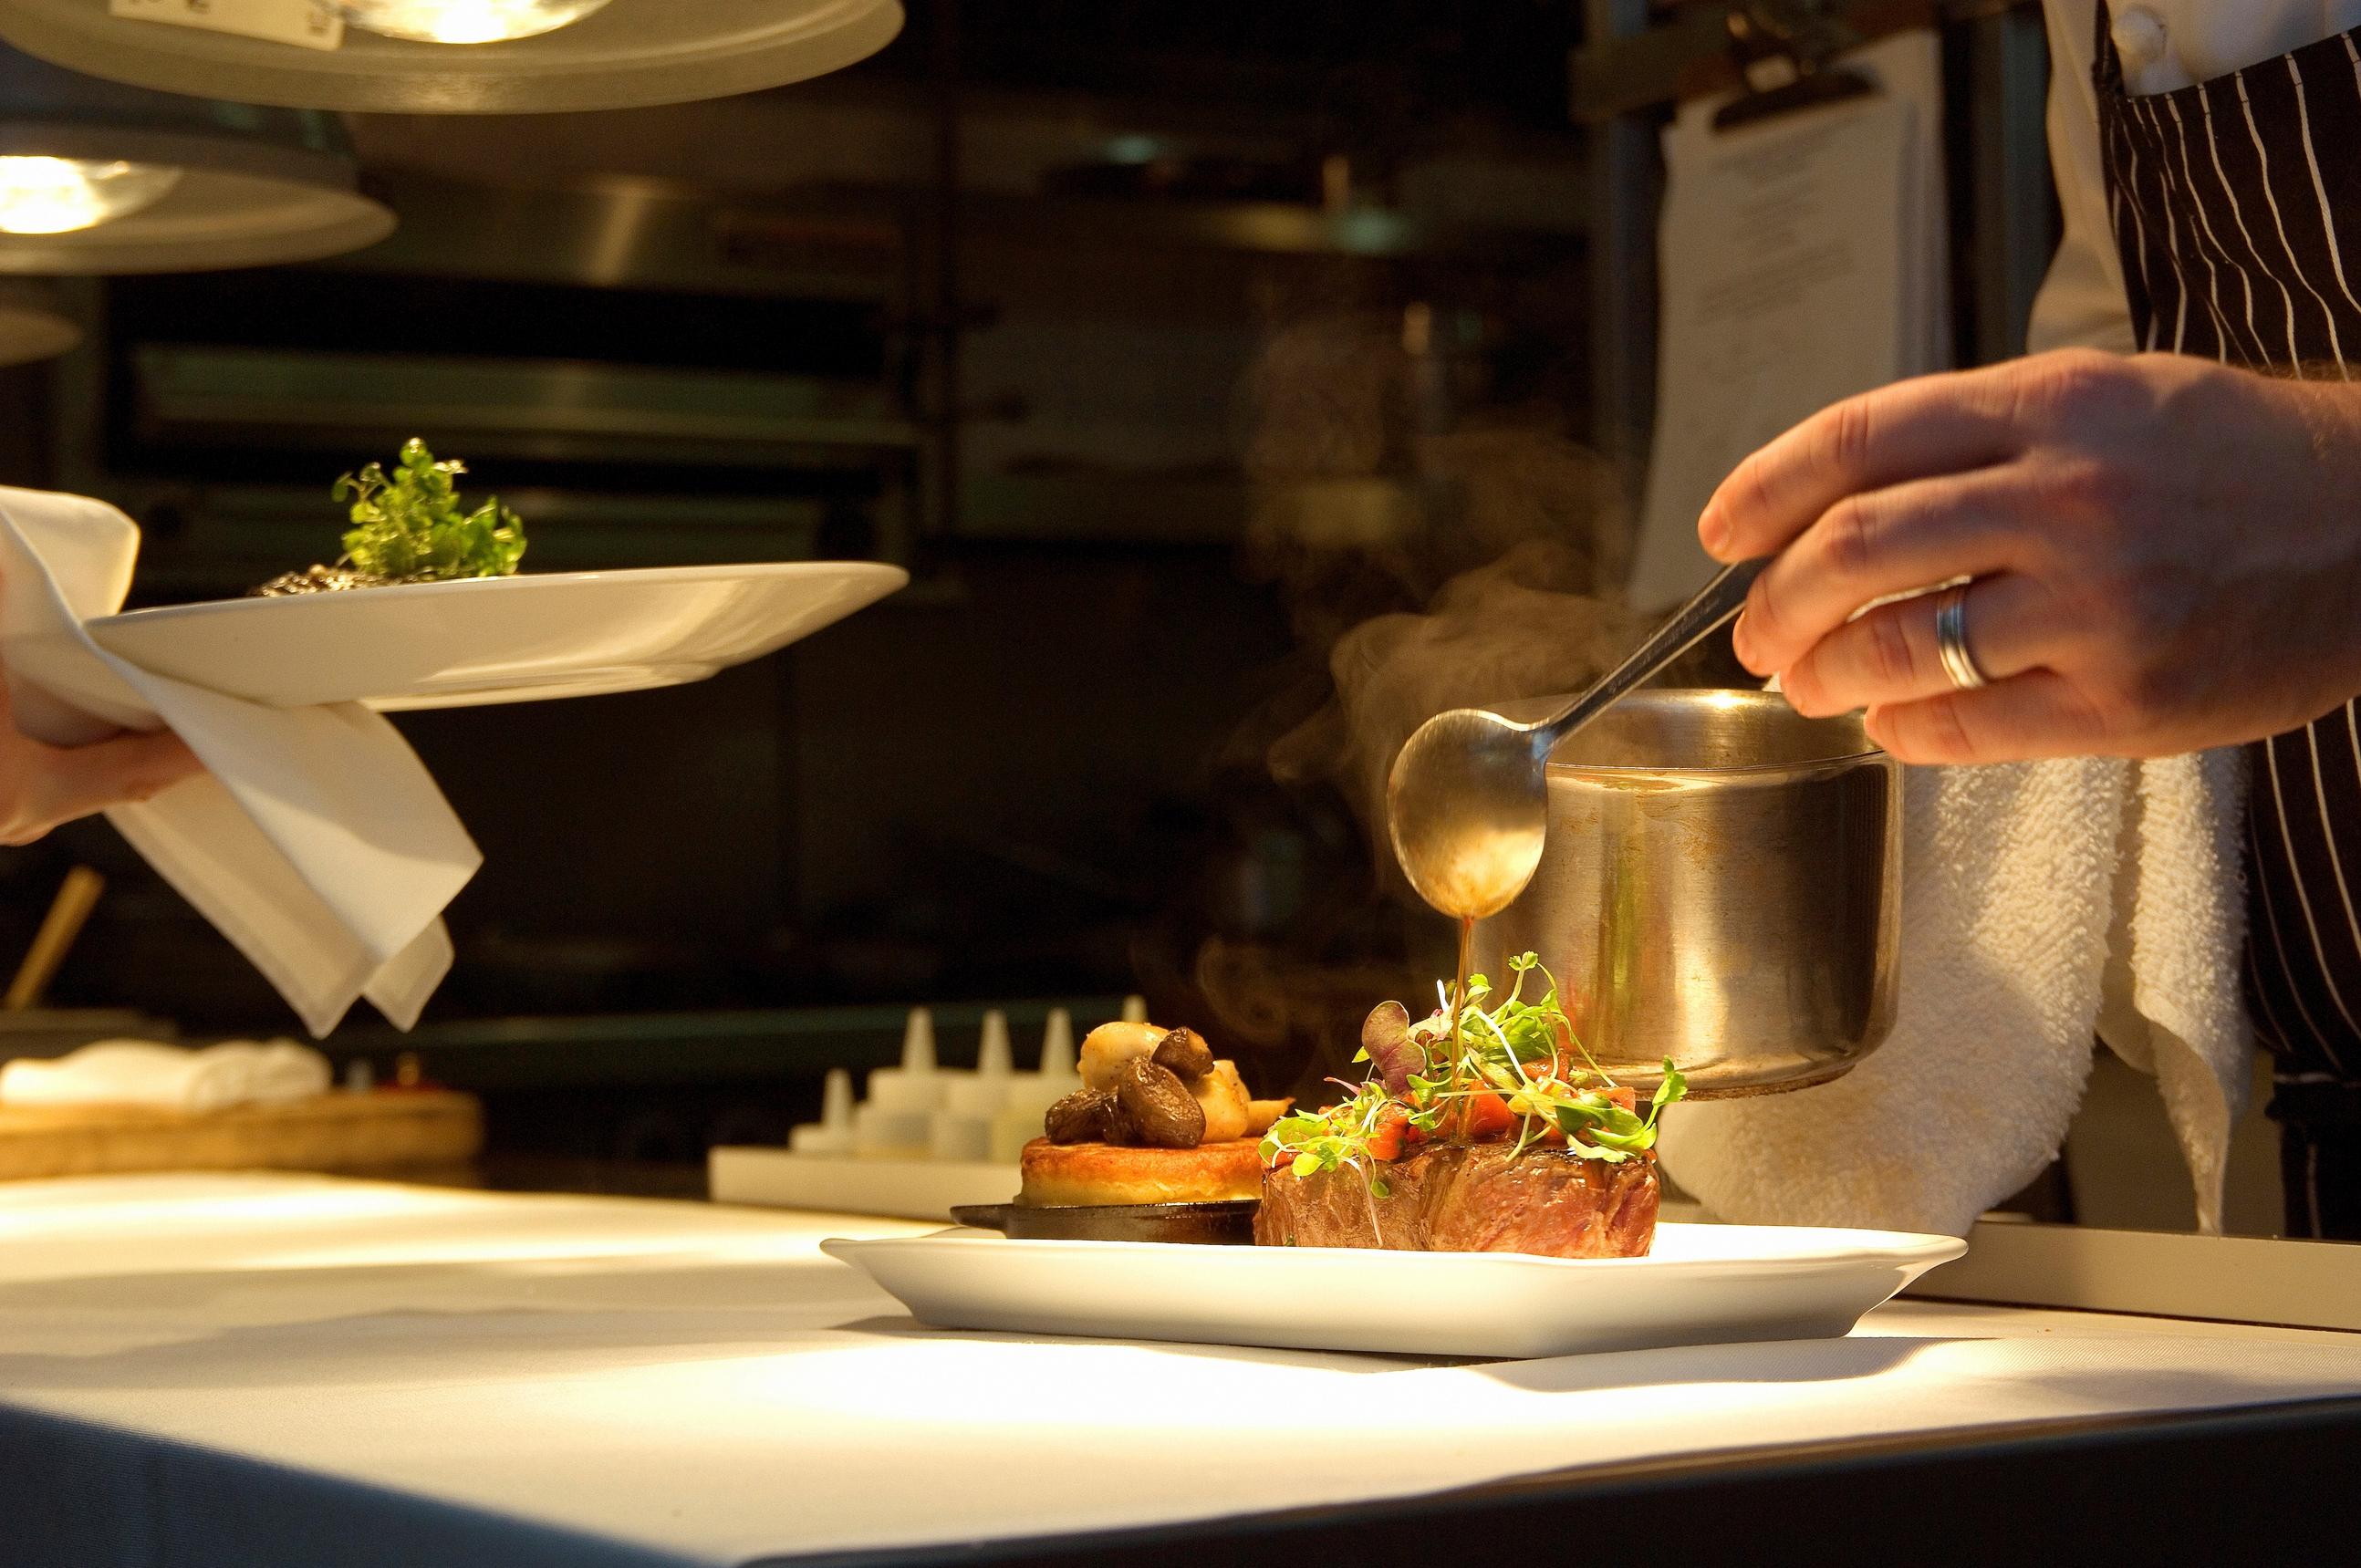 A chef plating food.